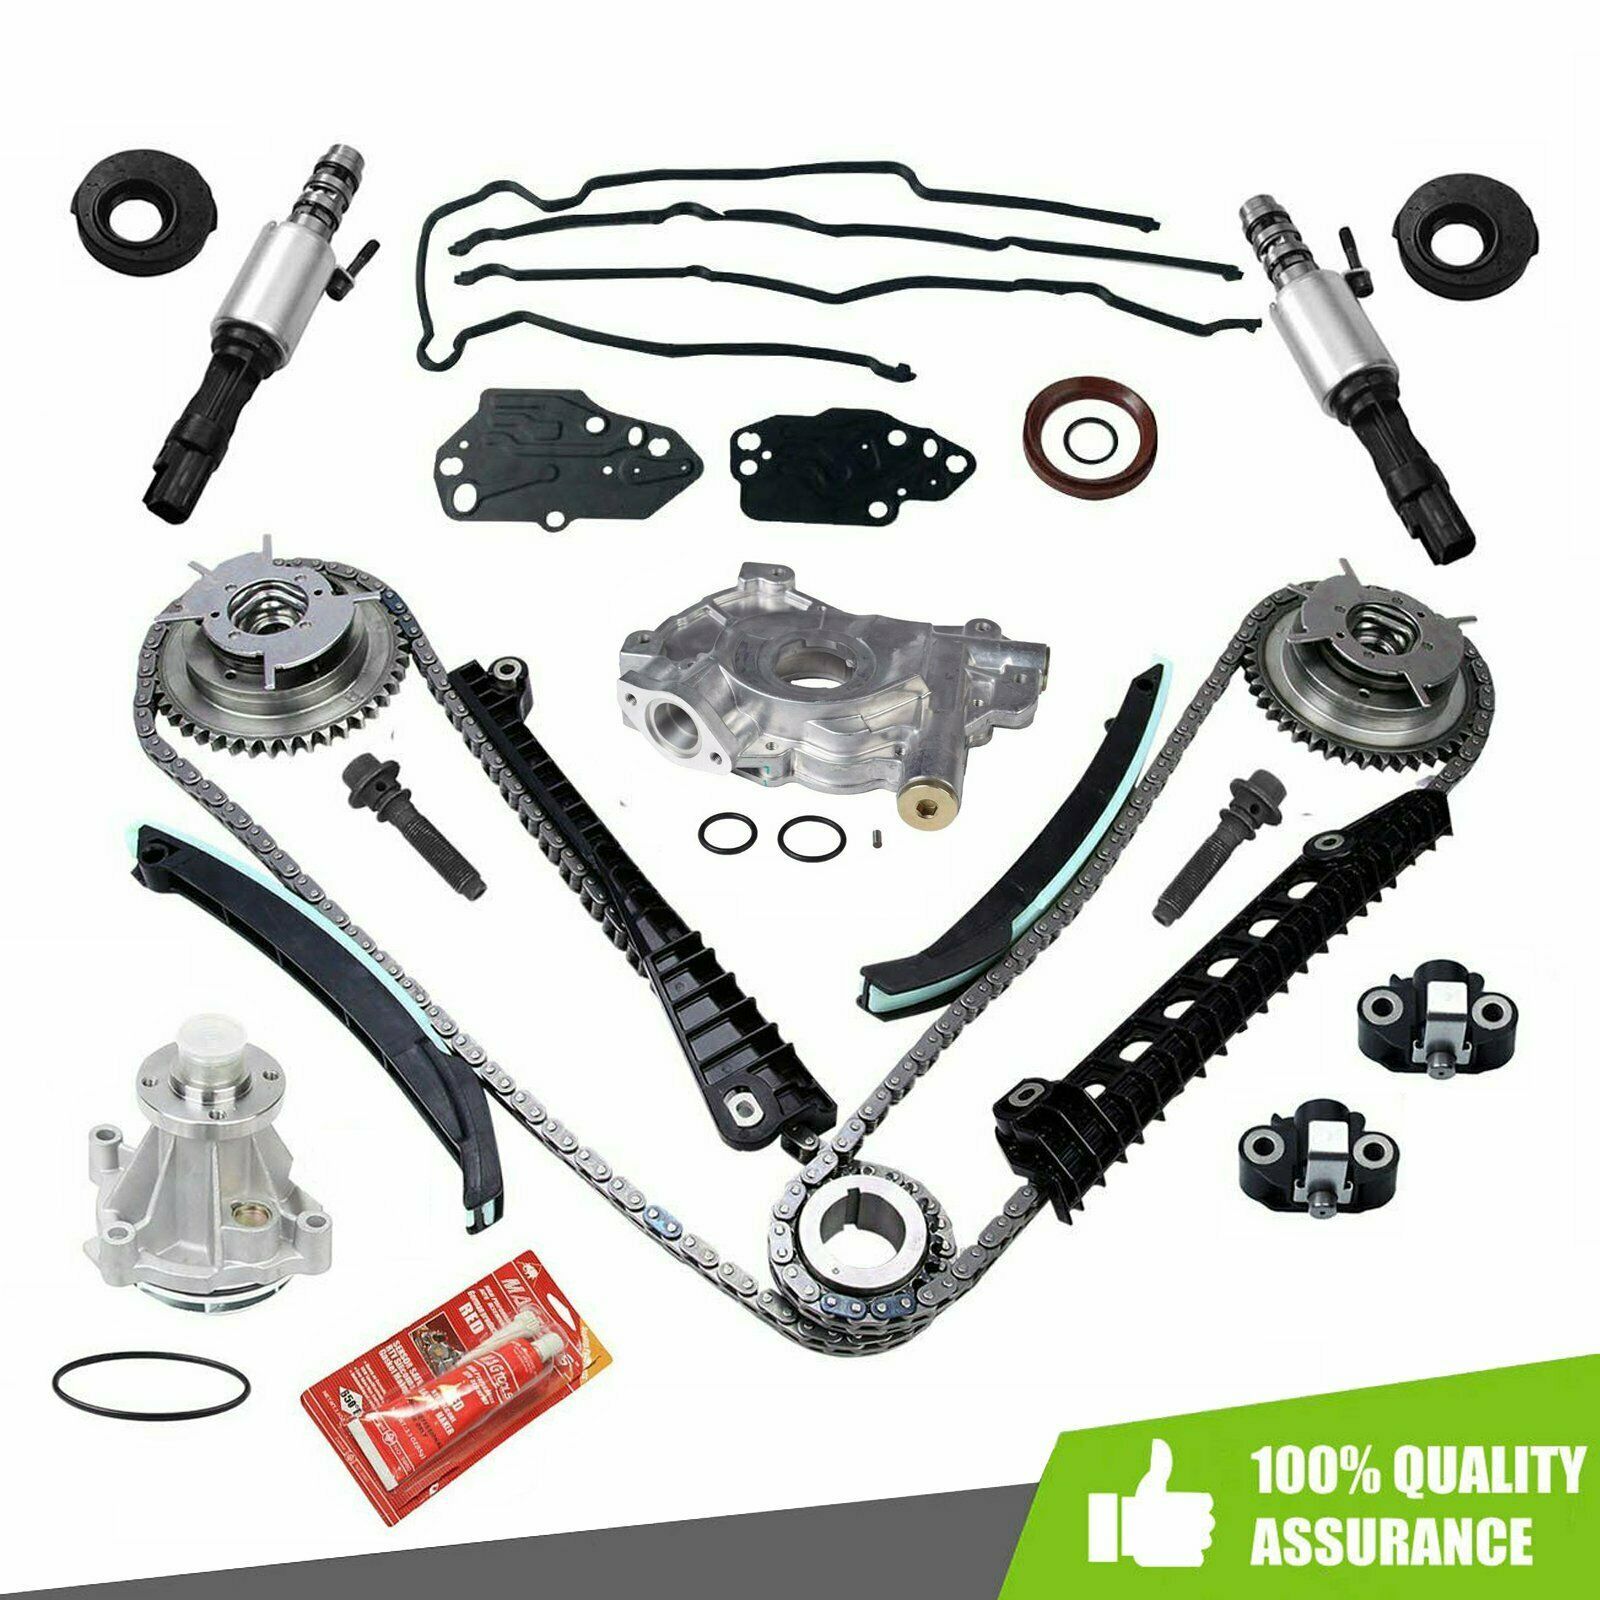 For Ford Lincoln 5.4 V3 Timing Chain Kits +Cam Phasers+Oil & Water Pump+Solenoid